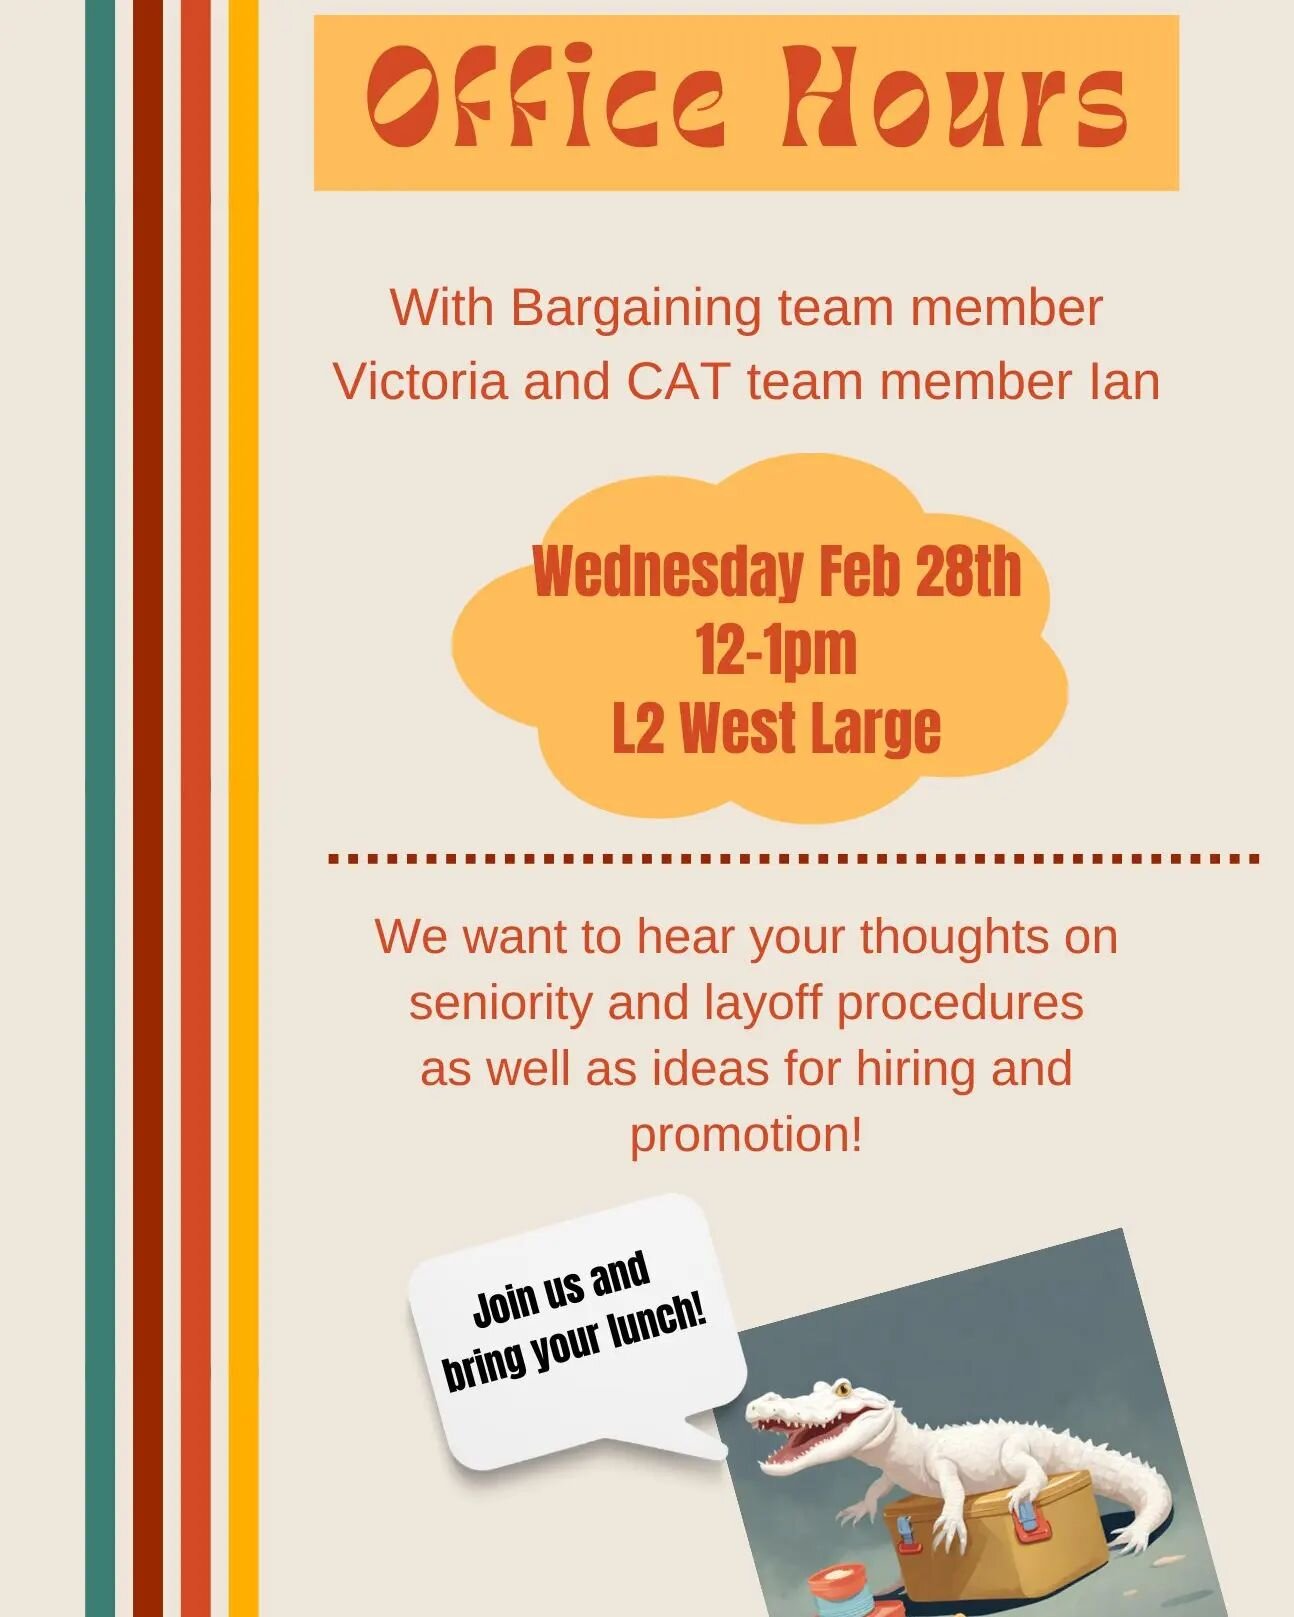 🌻 February Office Hours ☀️

Tomorrow Wednesday 2/28 from 12-1pm join Bargaining Team member Victoria Langlands and Contract Action Team member Ian Hart to discuss upcoming contract negotiations. The Bargaining Team wants to hear your thoughts on sen